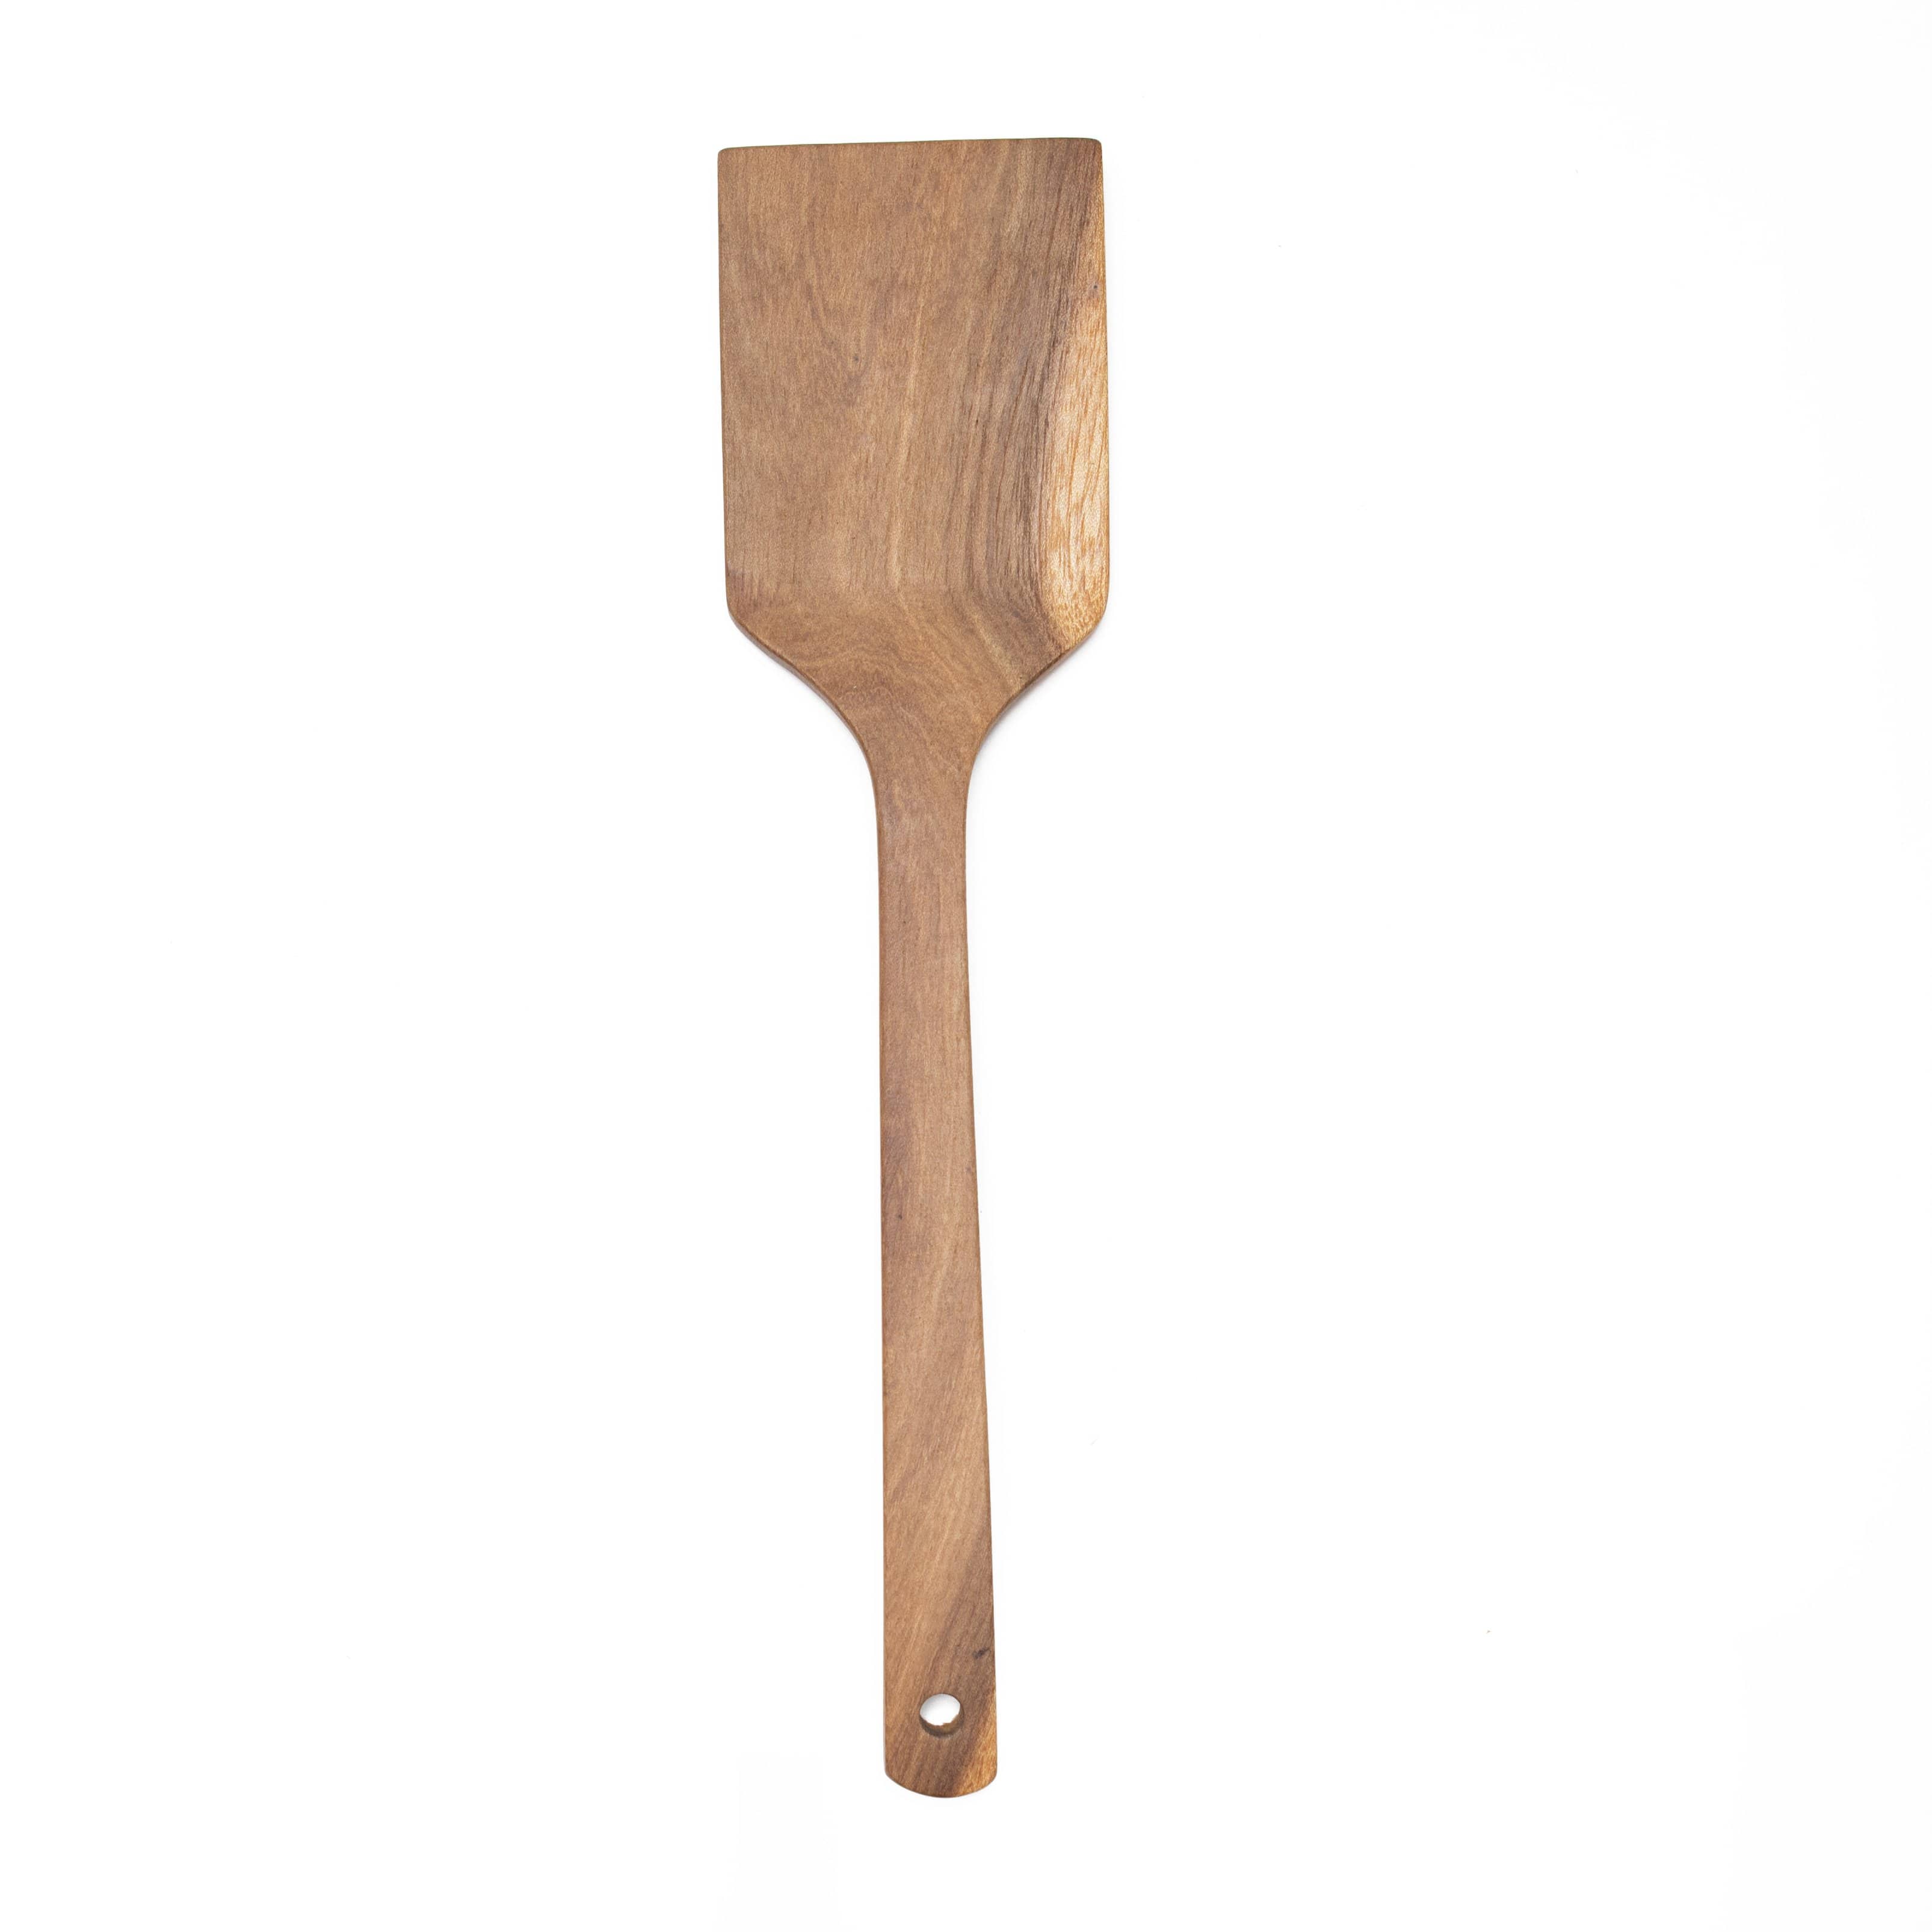 This beautiful and extremely functional spatula is great for flipping pancakes and more! Finished with food-safe raw tung oil, each spatula is durable and protected against the elements. Choose from Coffeewood, Macawood, or Laurelwood. As always, Handmade and Fair Trade!